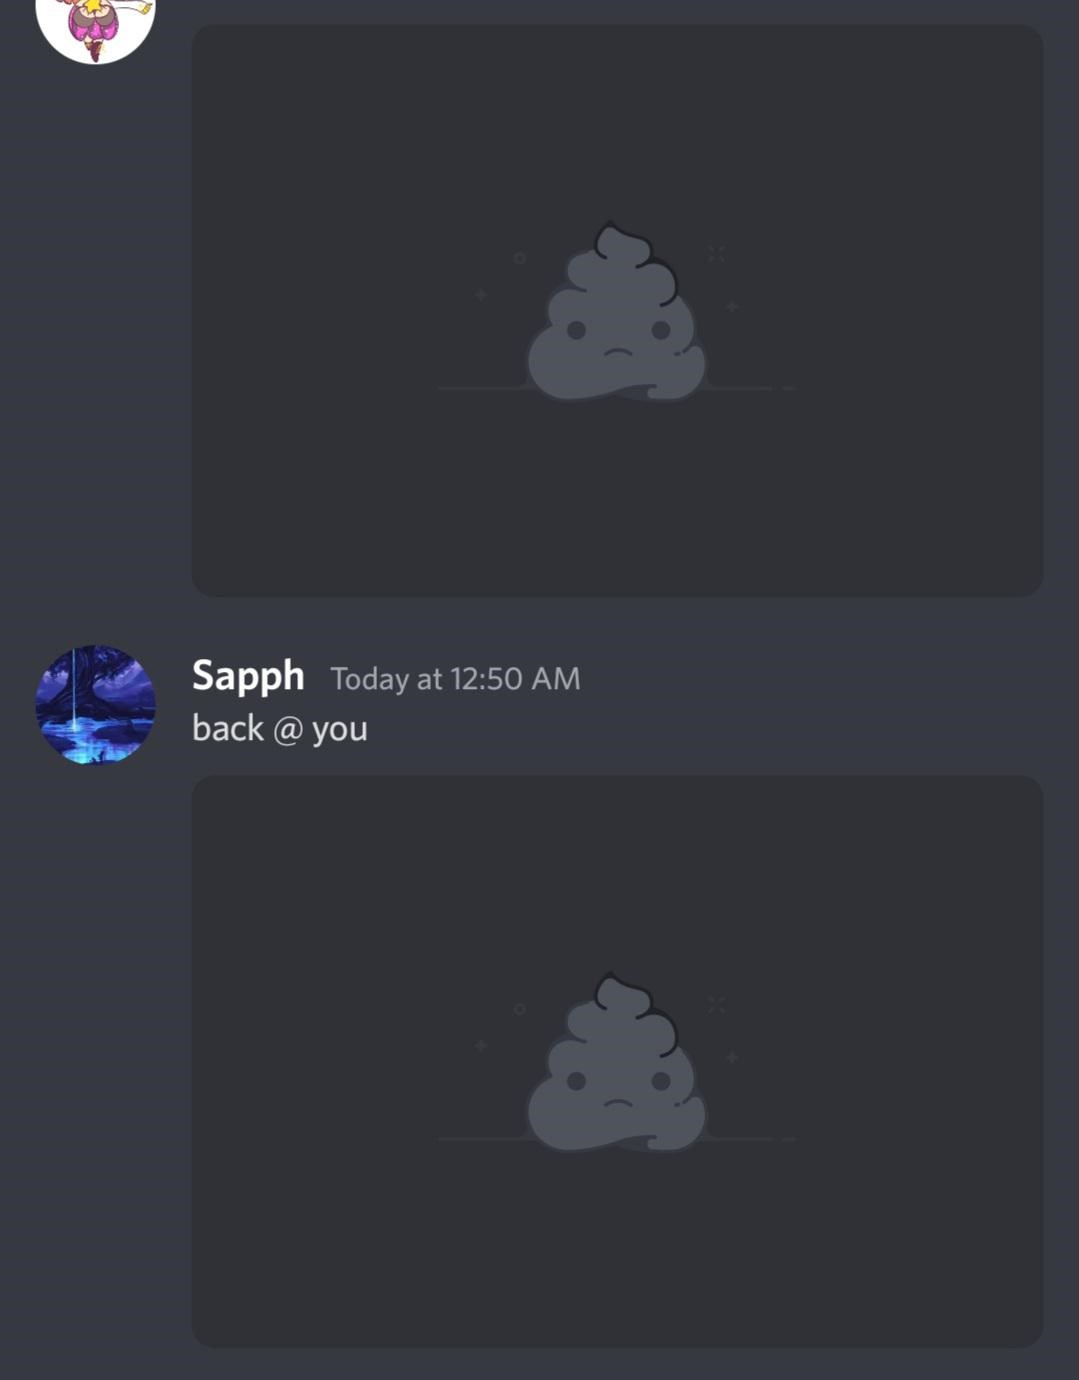 Discord images not loading issue